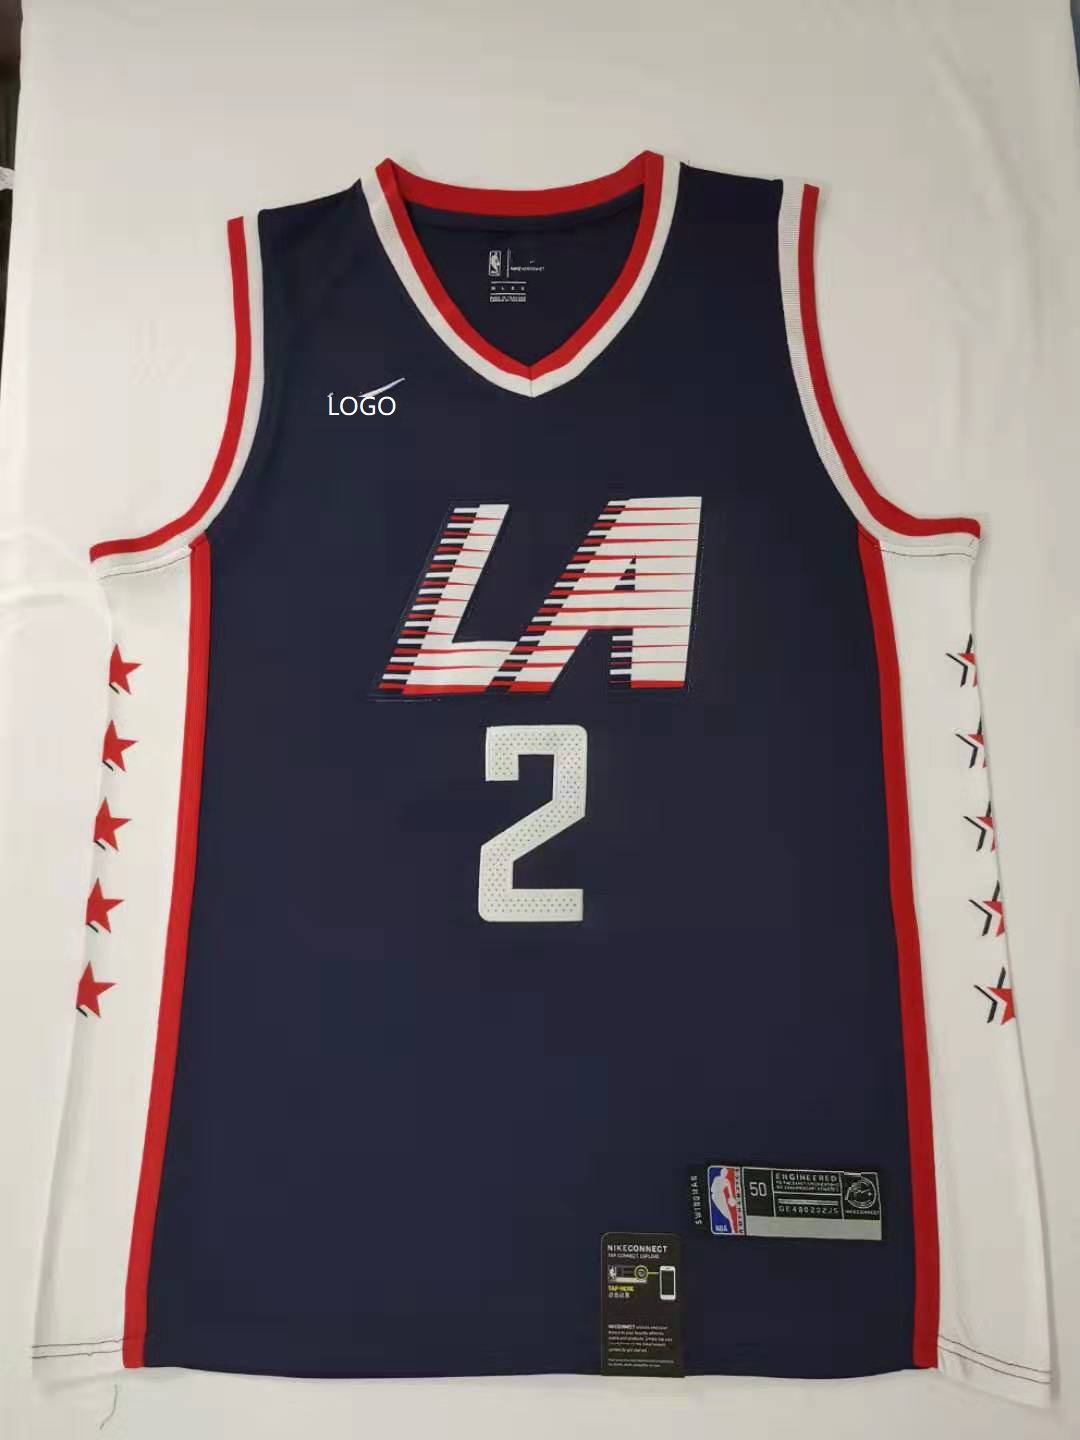 2019 clippers jersey